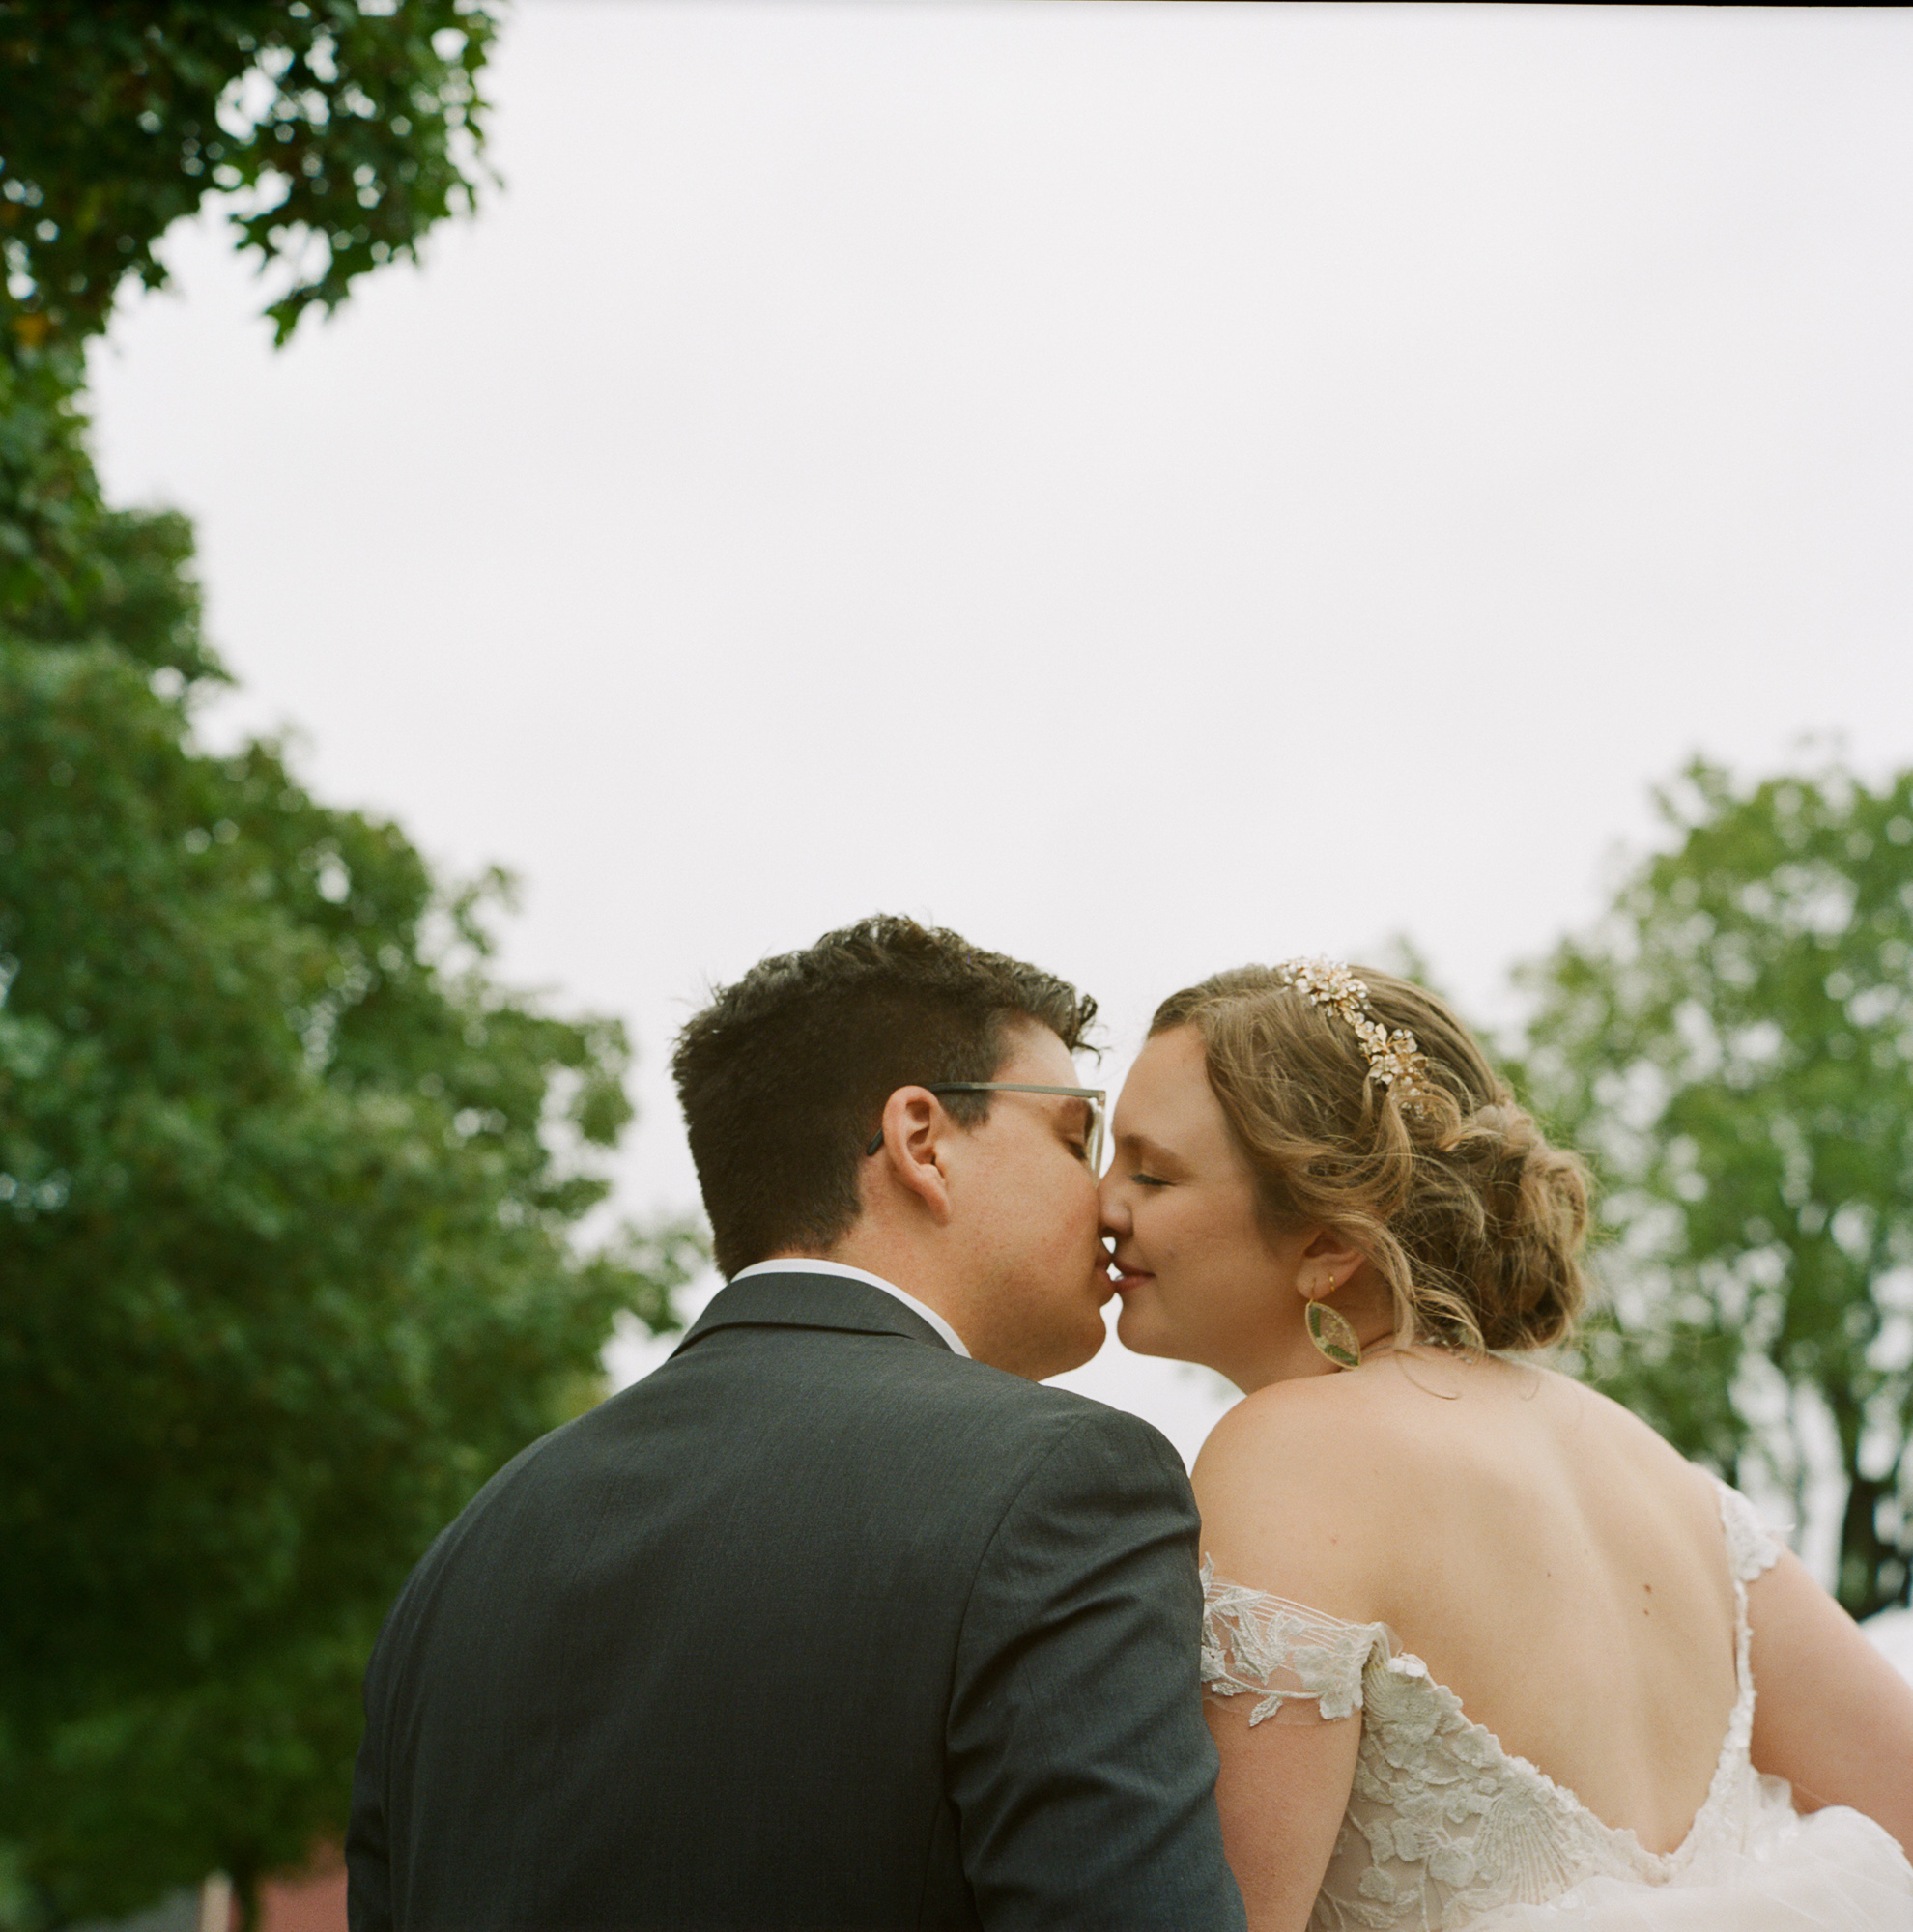 An elegant bride and groom share a kiss at their wedding reception at Suydam Farms in Somerset, NJ